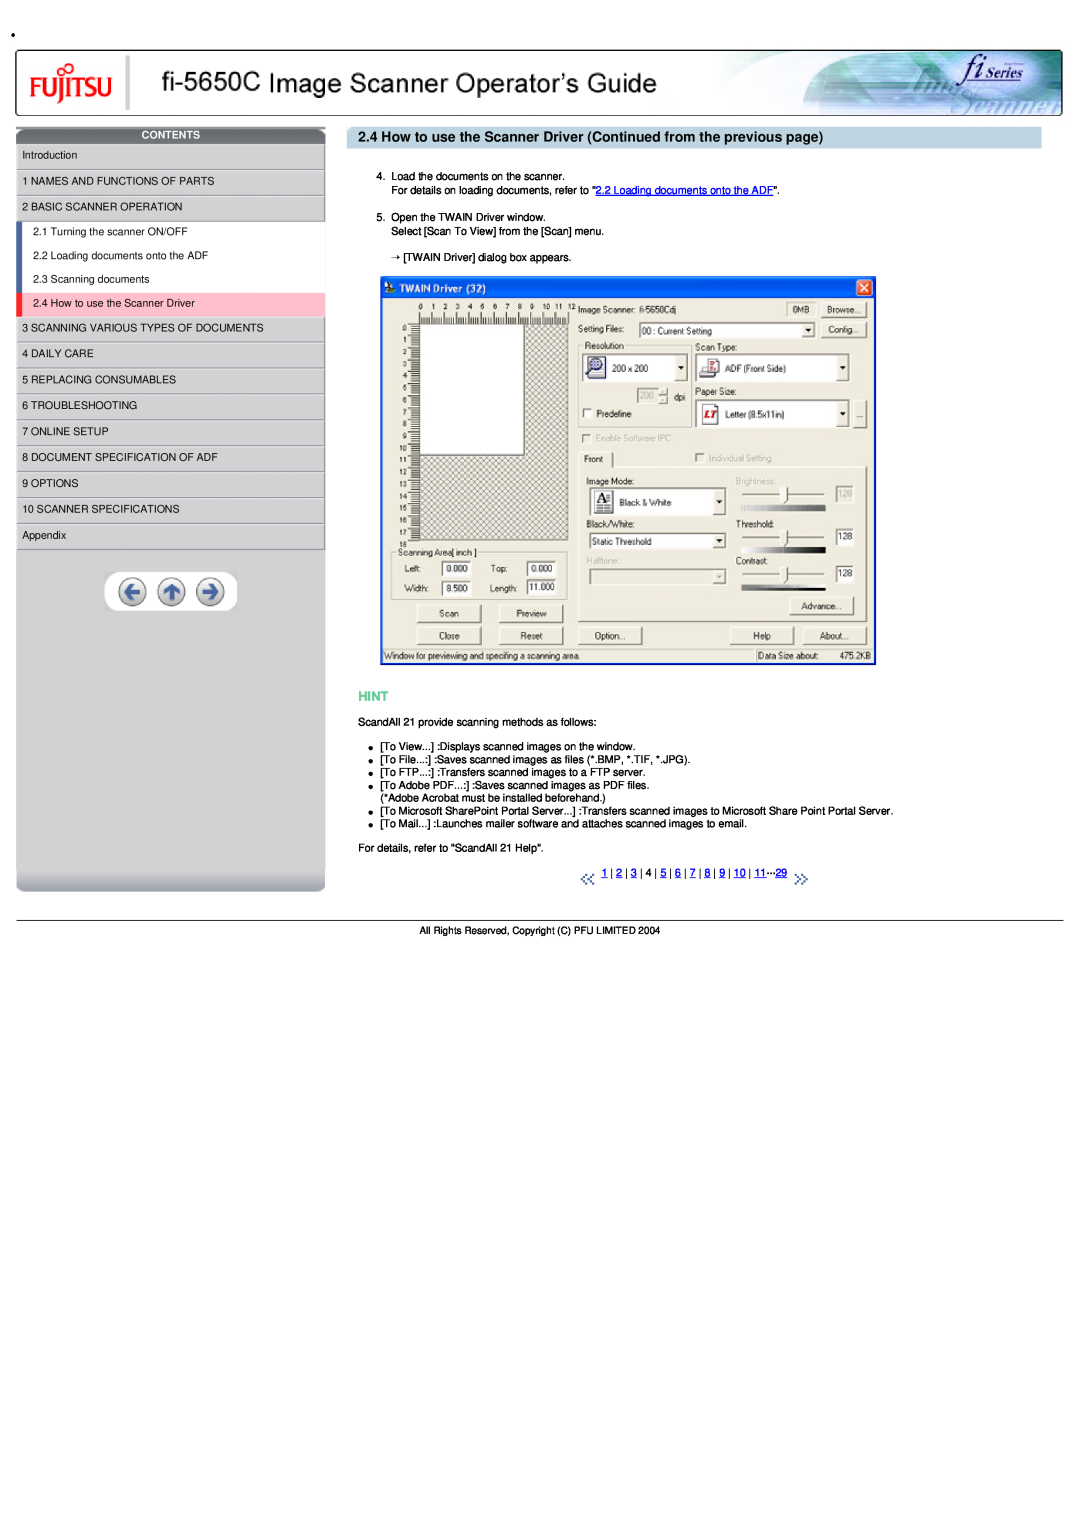 Fujitsu fi-5650C specifications How to use the Scanner Driver Continued from the previous page, Hint, Contents 